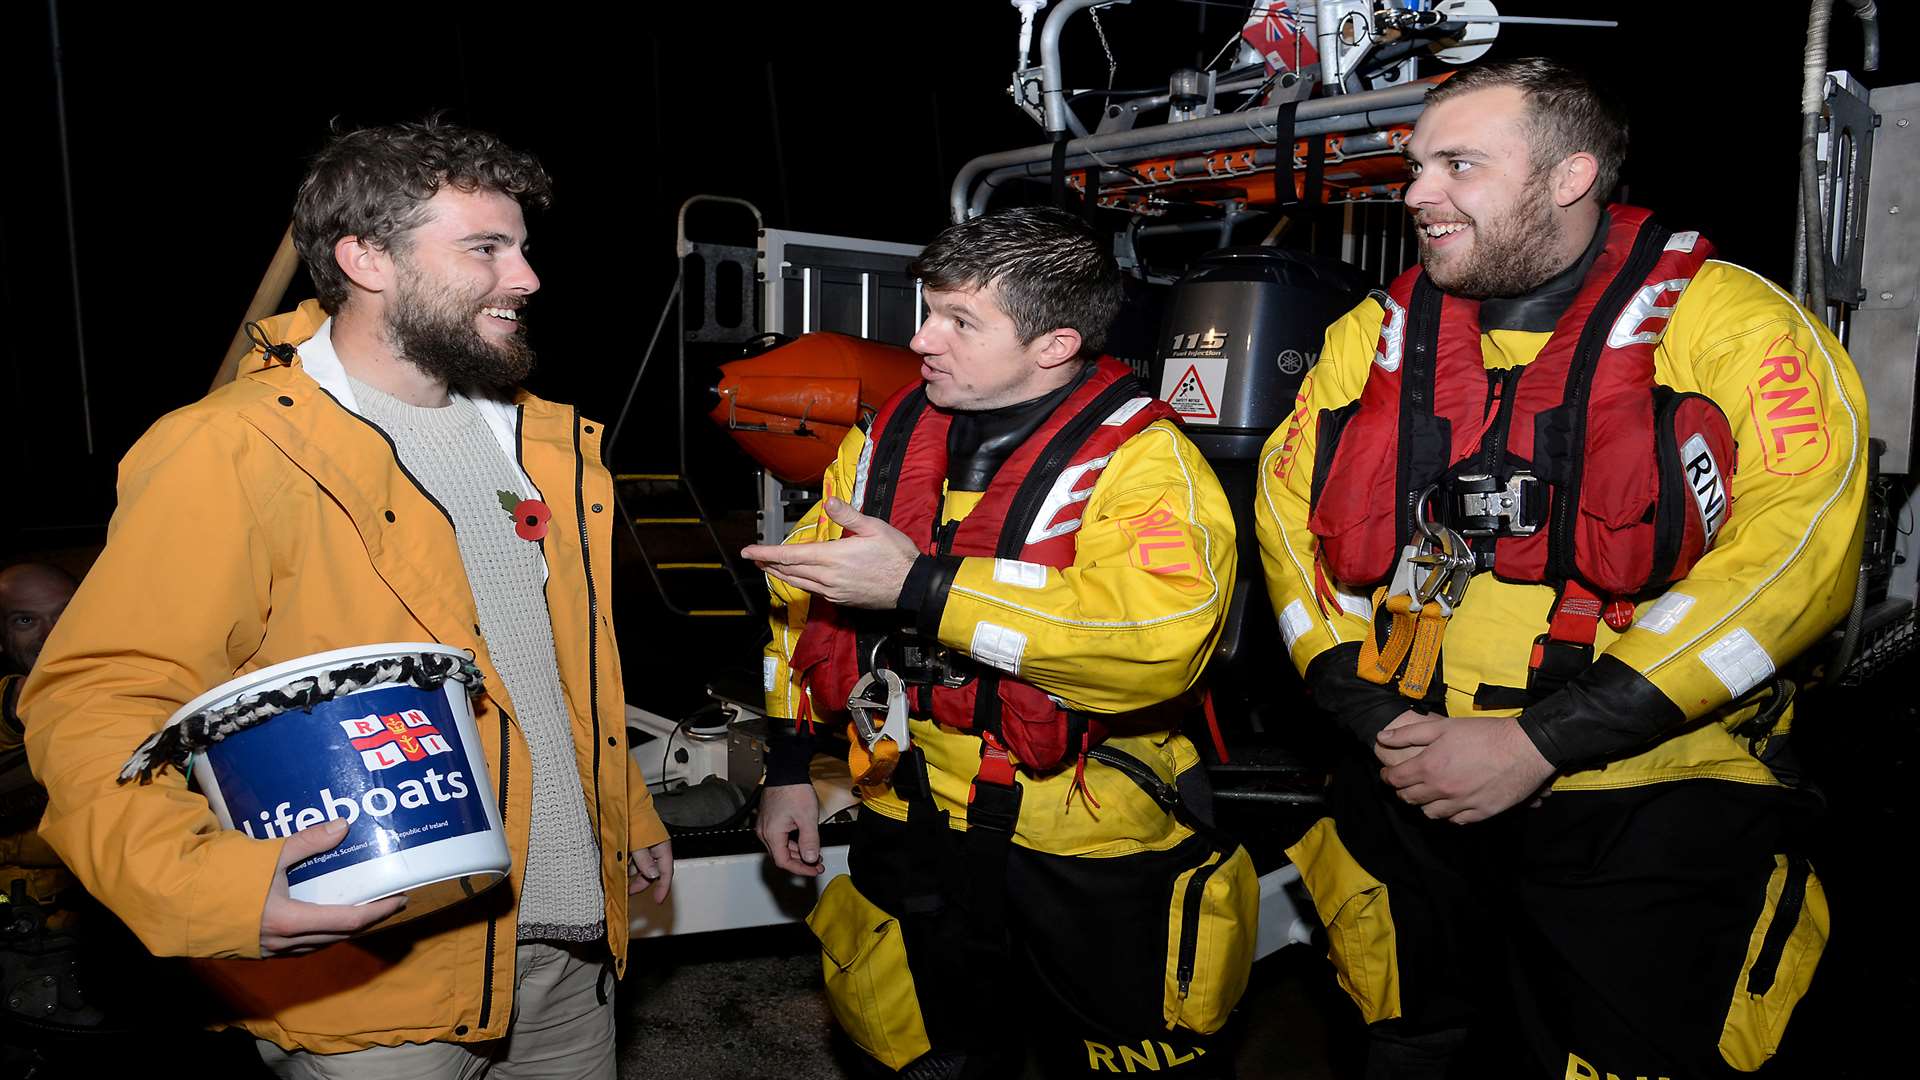 He has visited more than 200 lifeboat stations